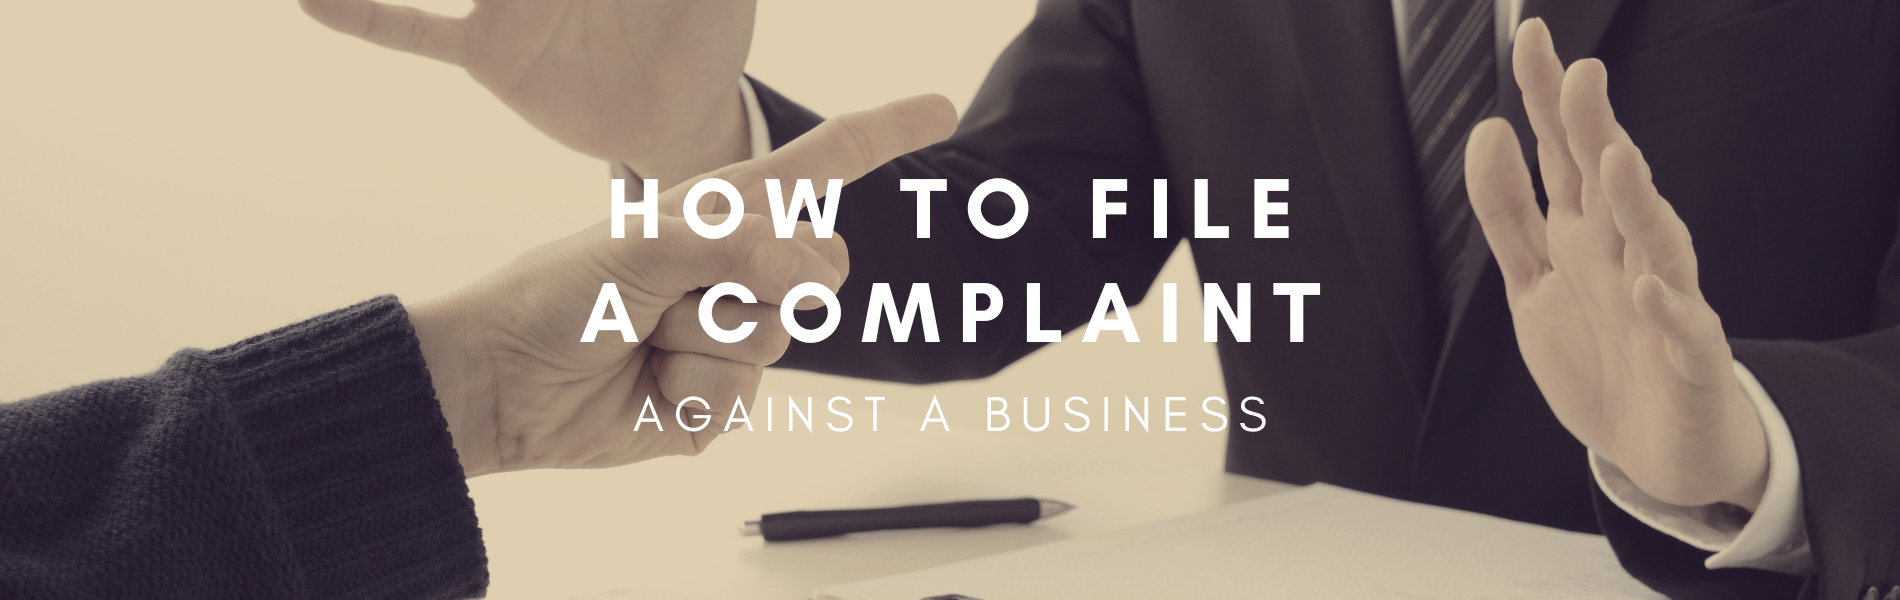 how to file a complaint against a business